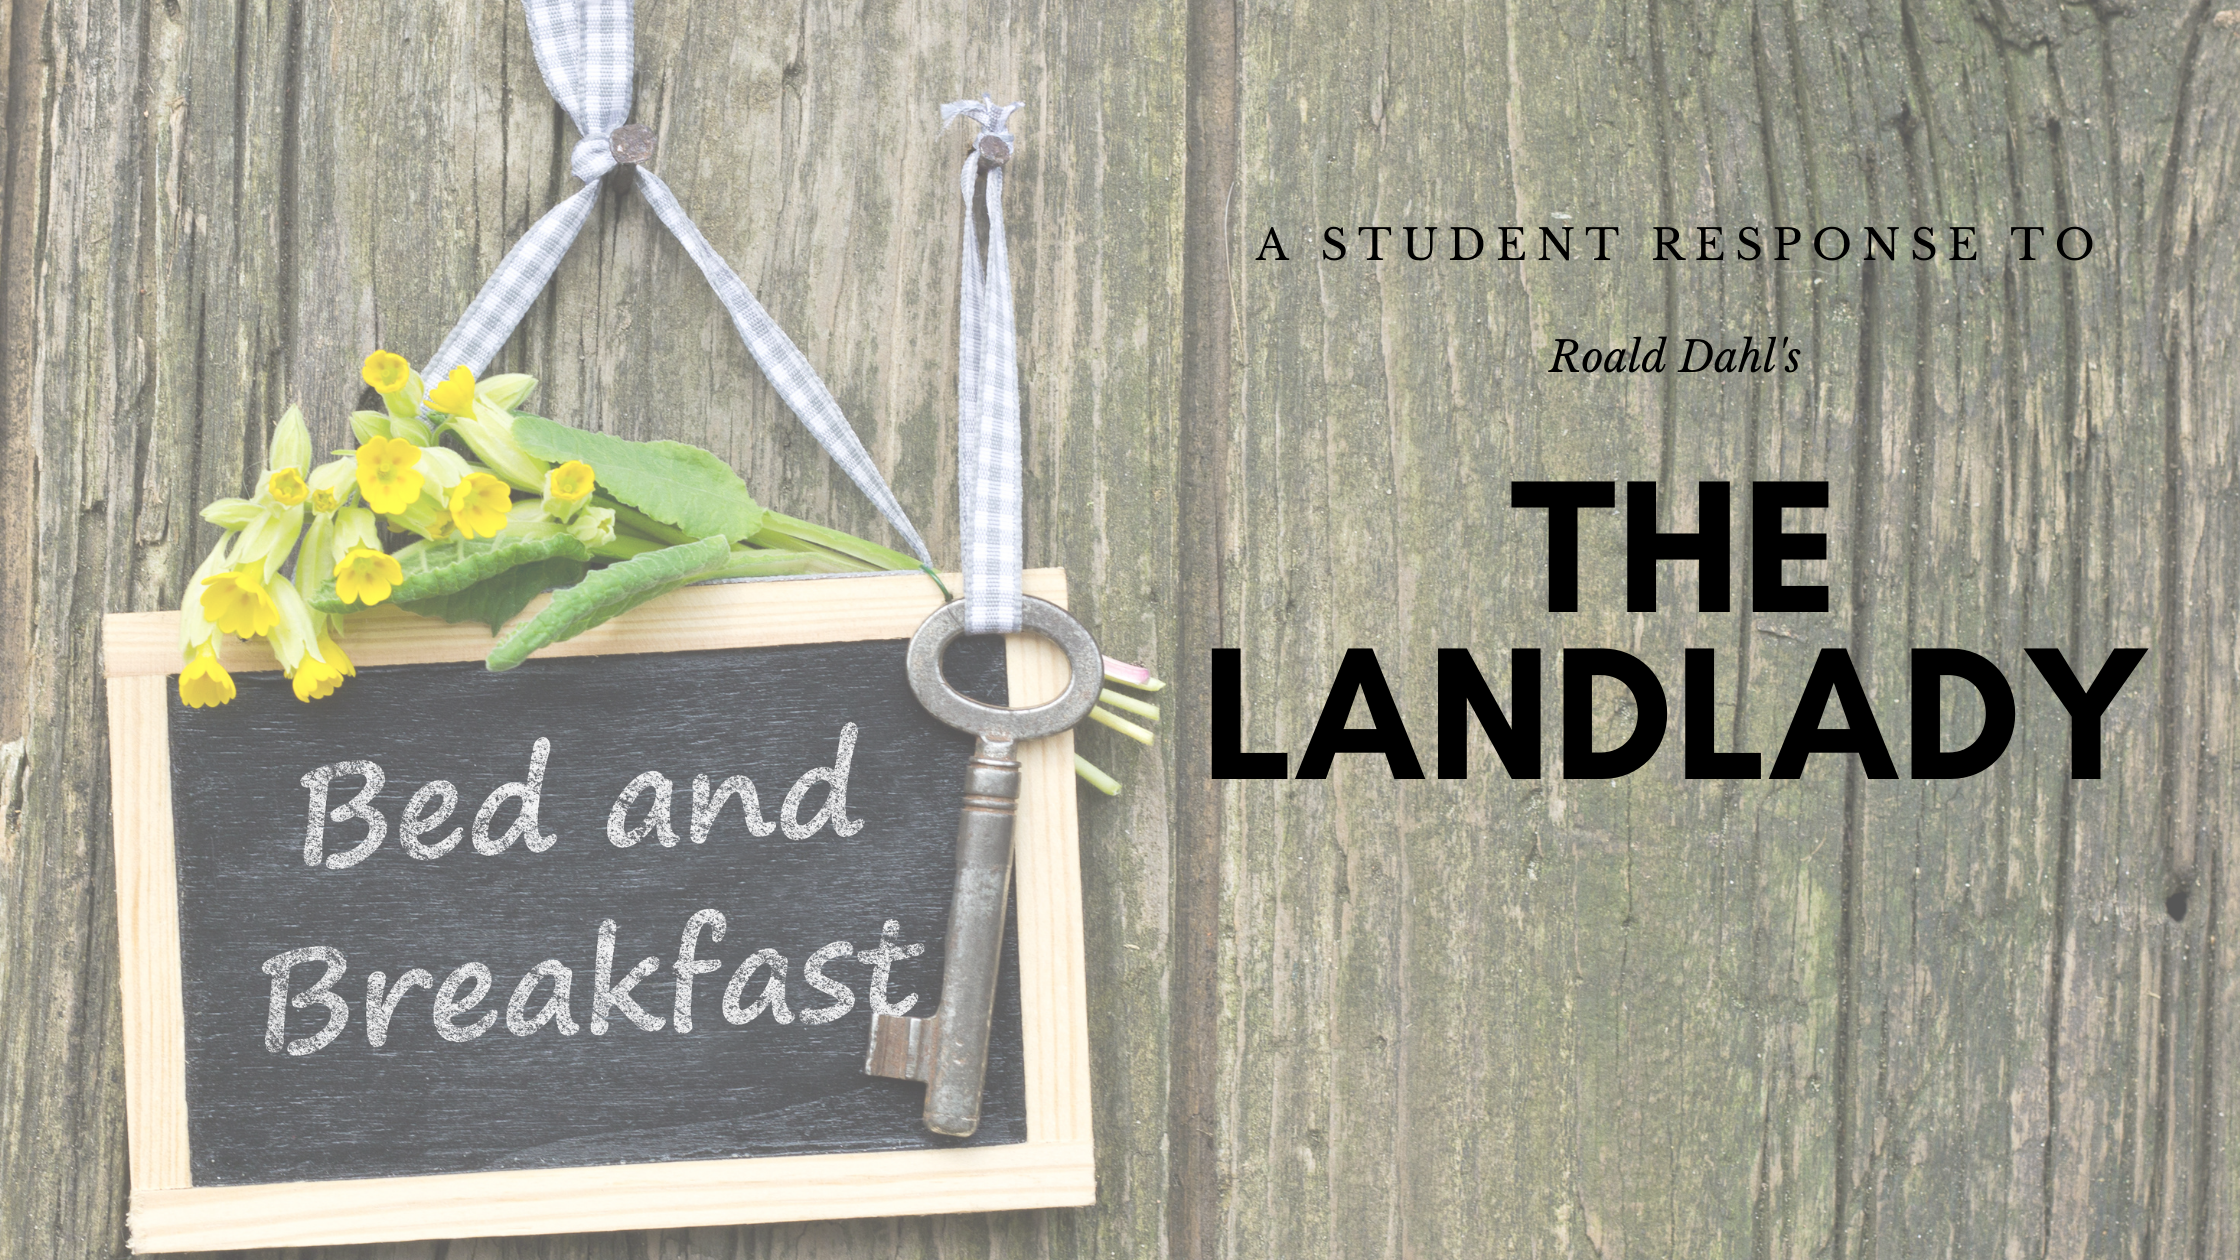 You are currently viewing Student Response to “The Landlady” in 2021